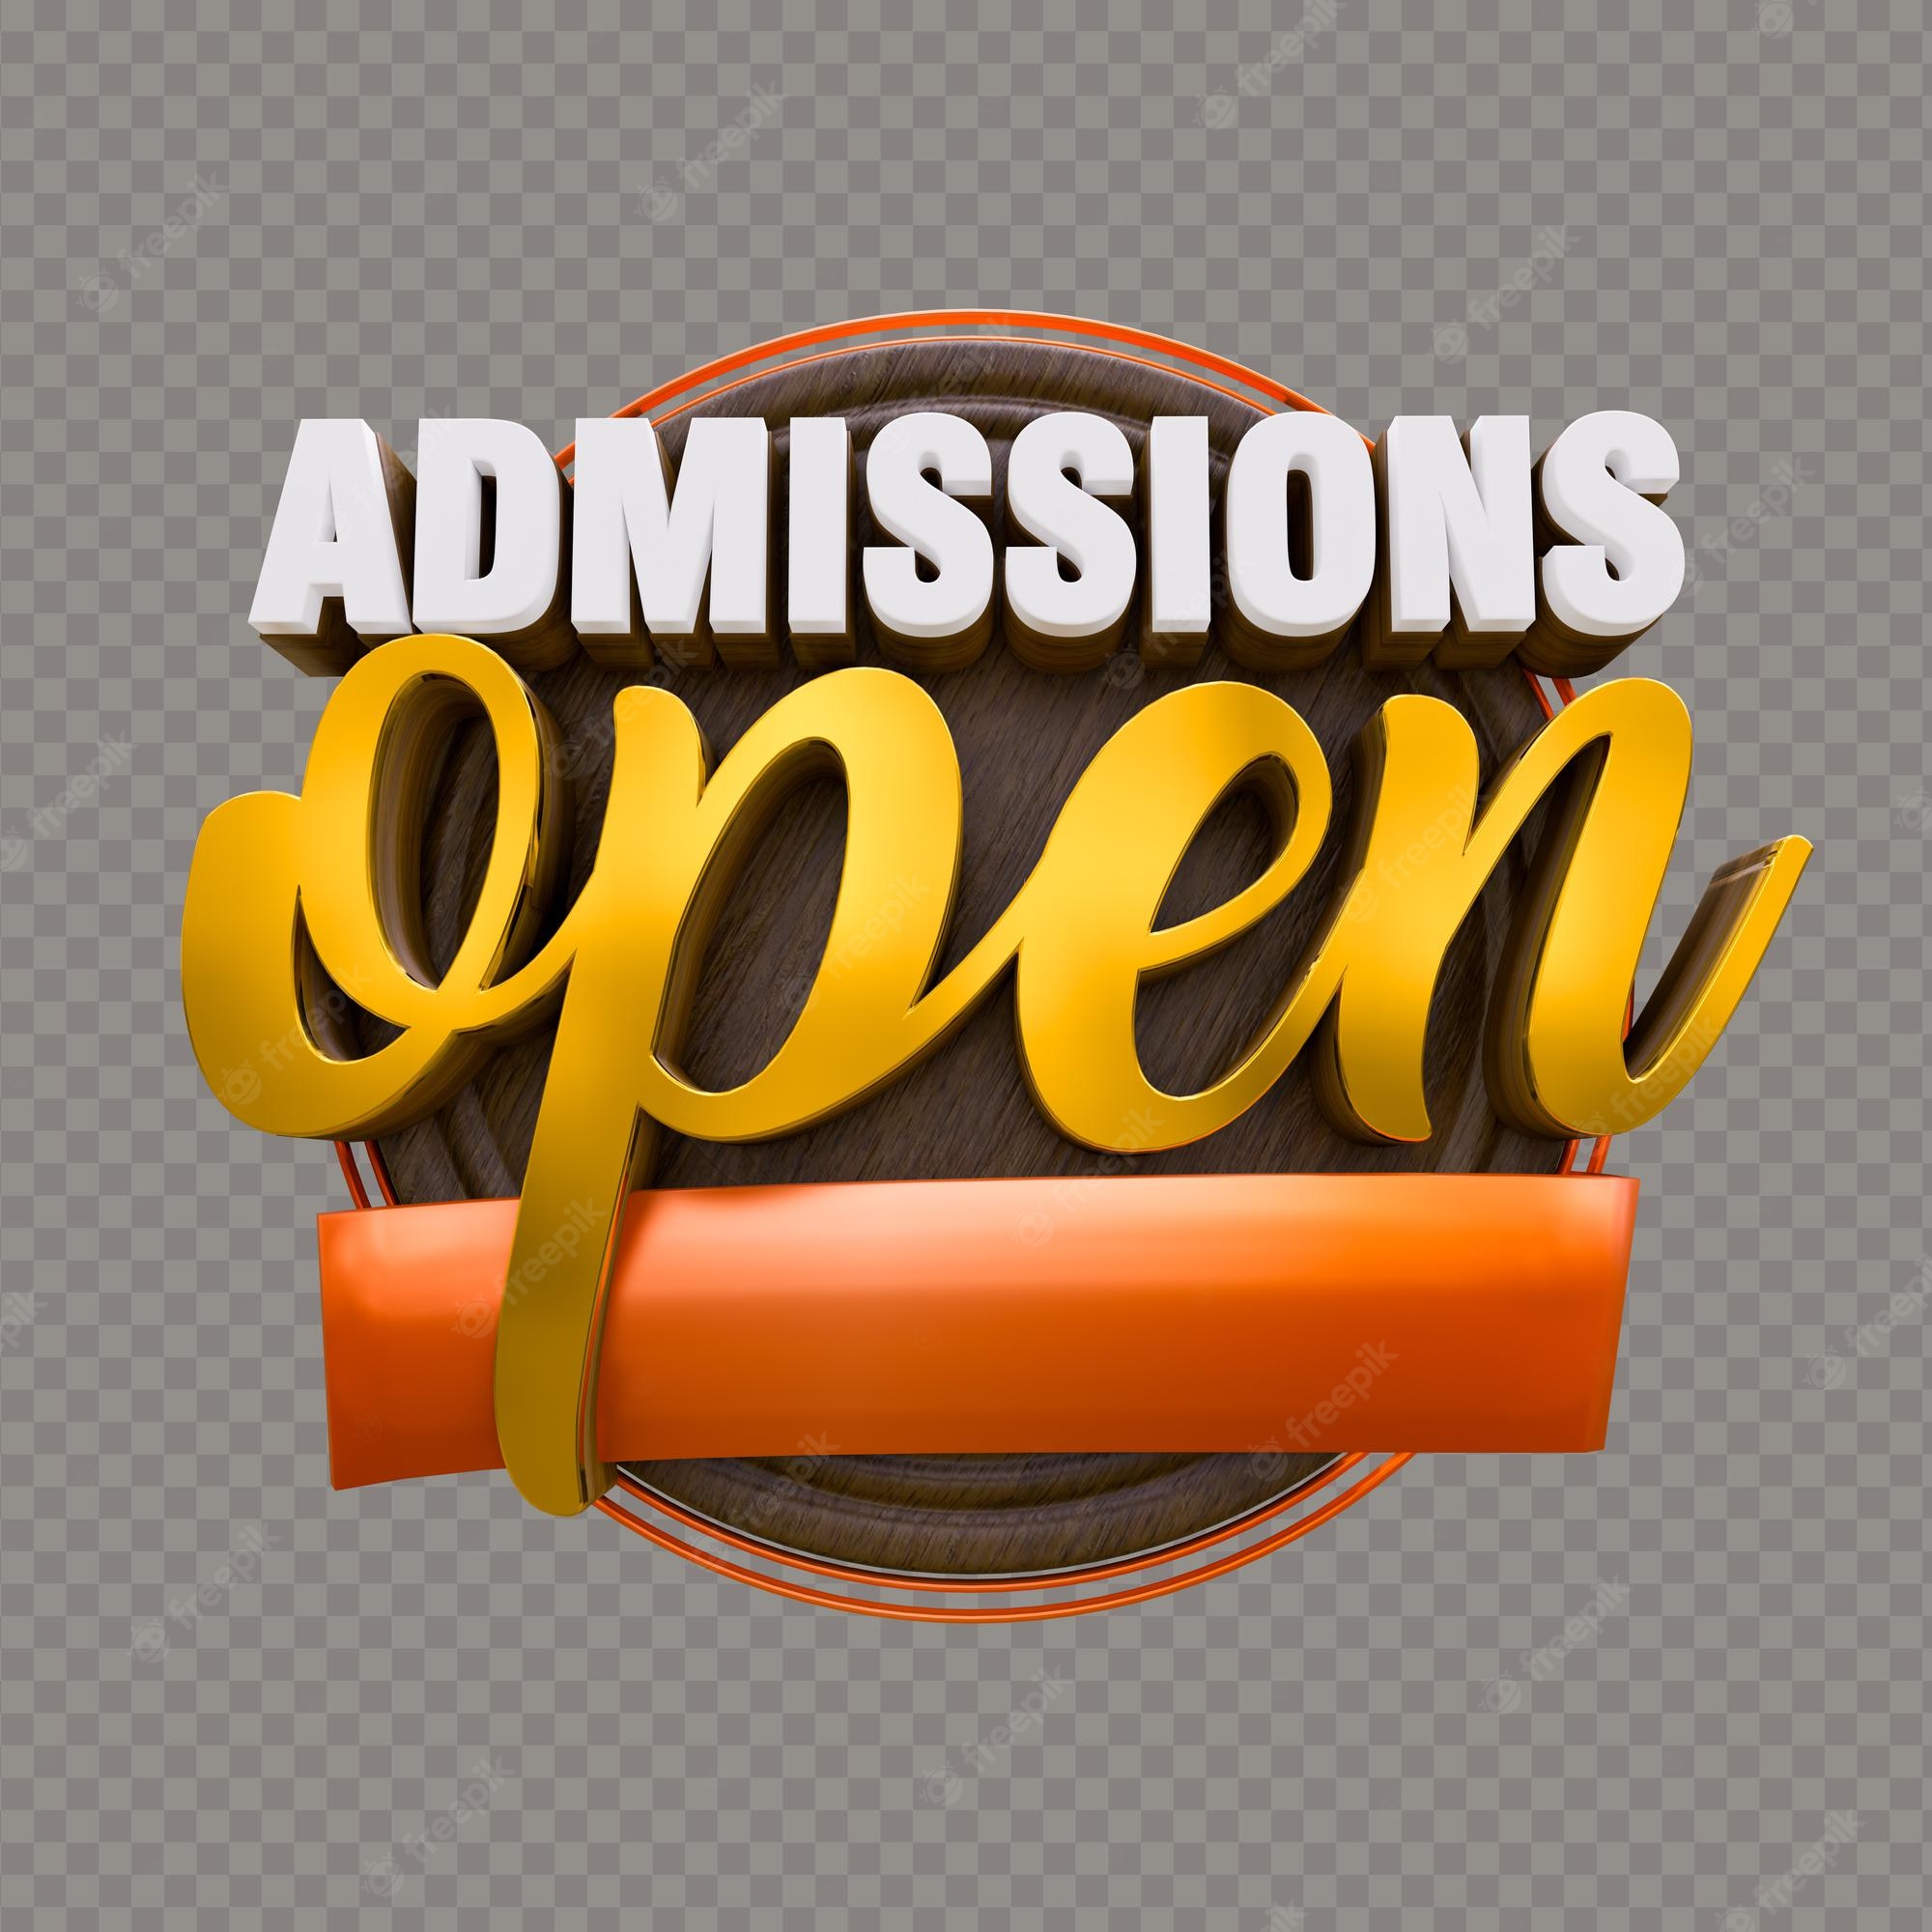 709 Admission Open Text Images, Stock Photos, 3D objects, & Vectors |  Shutterstock